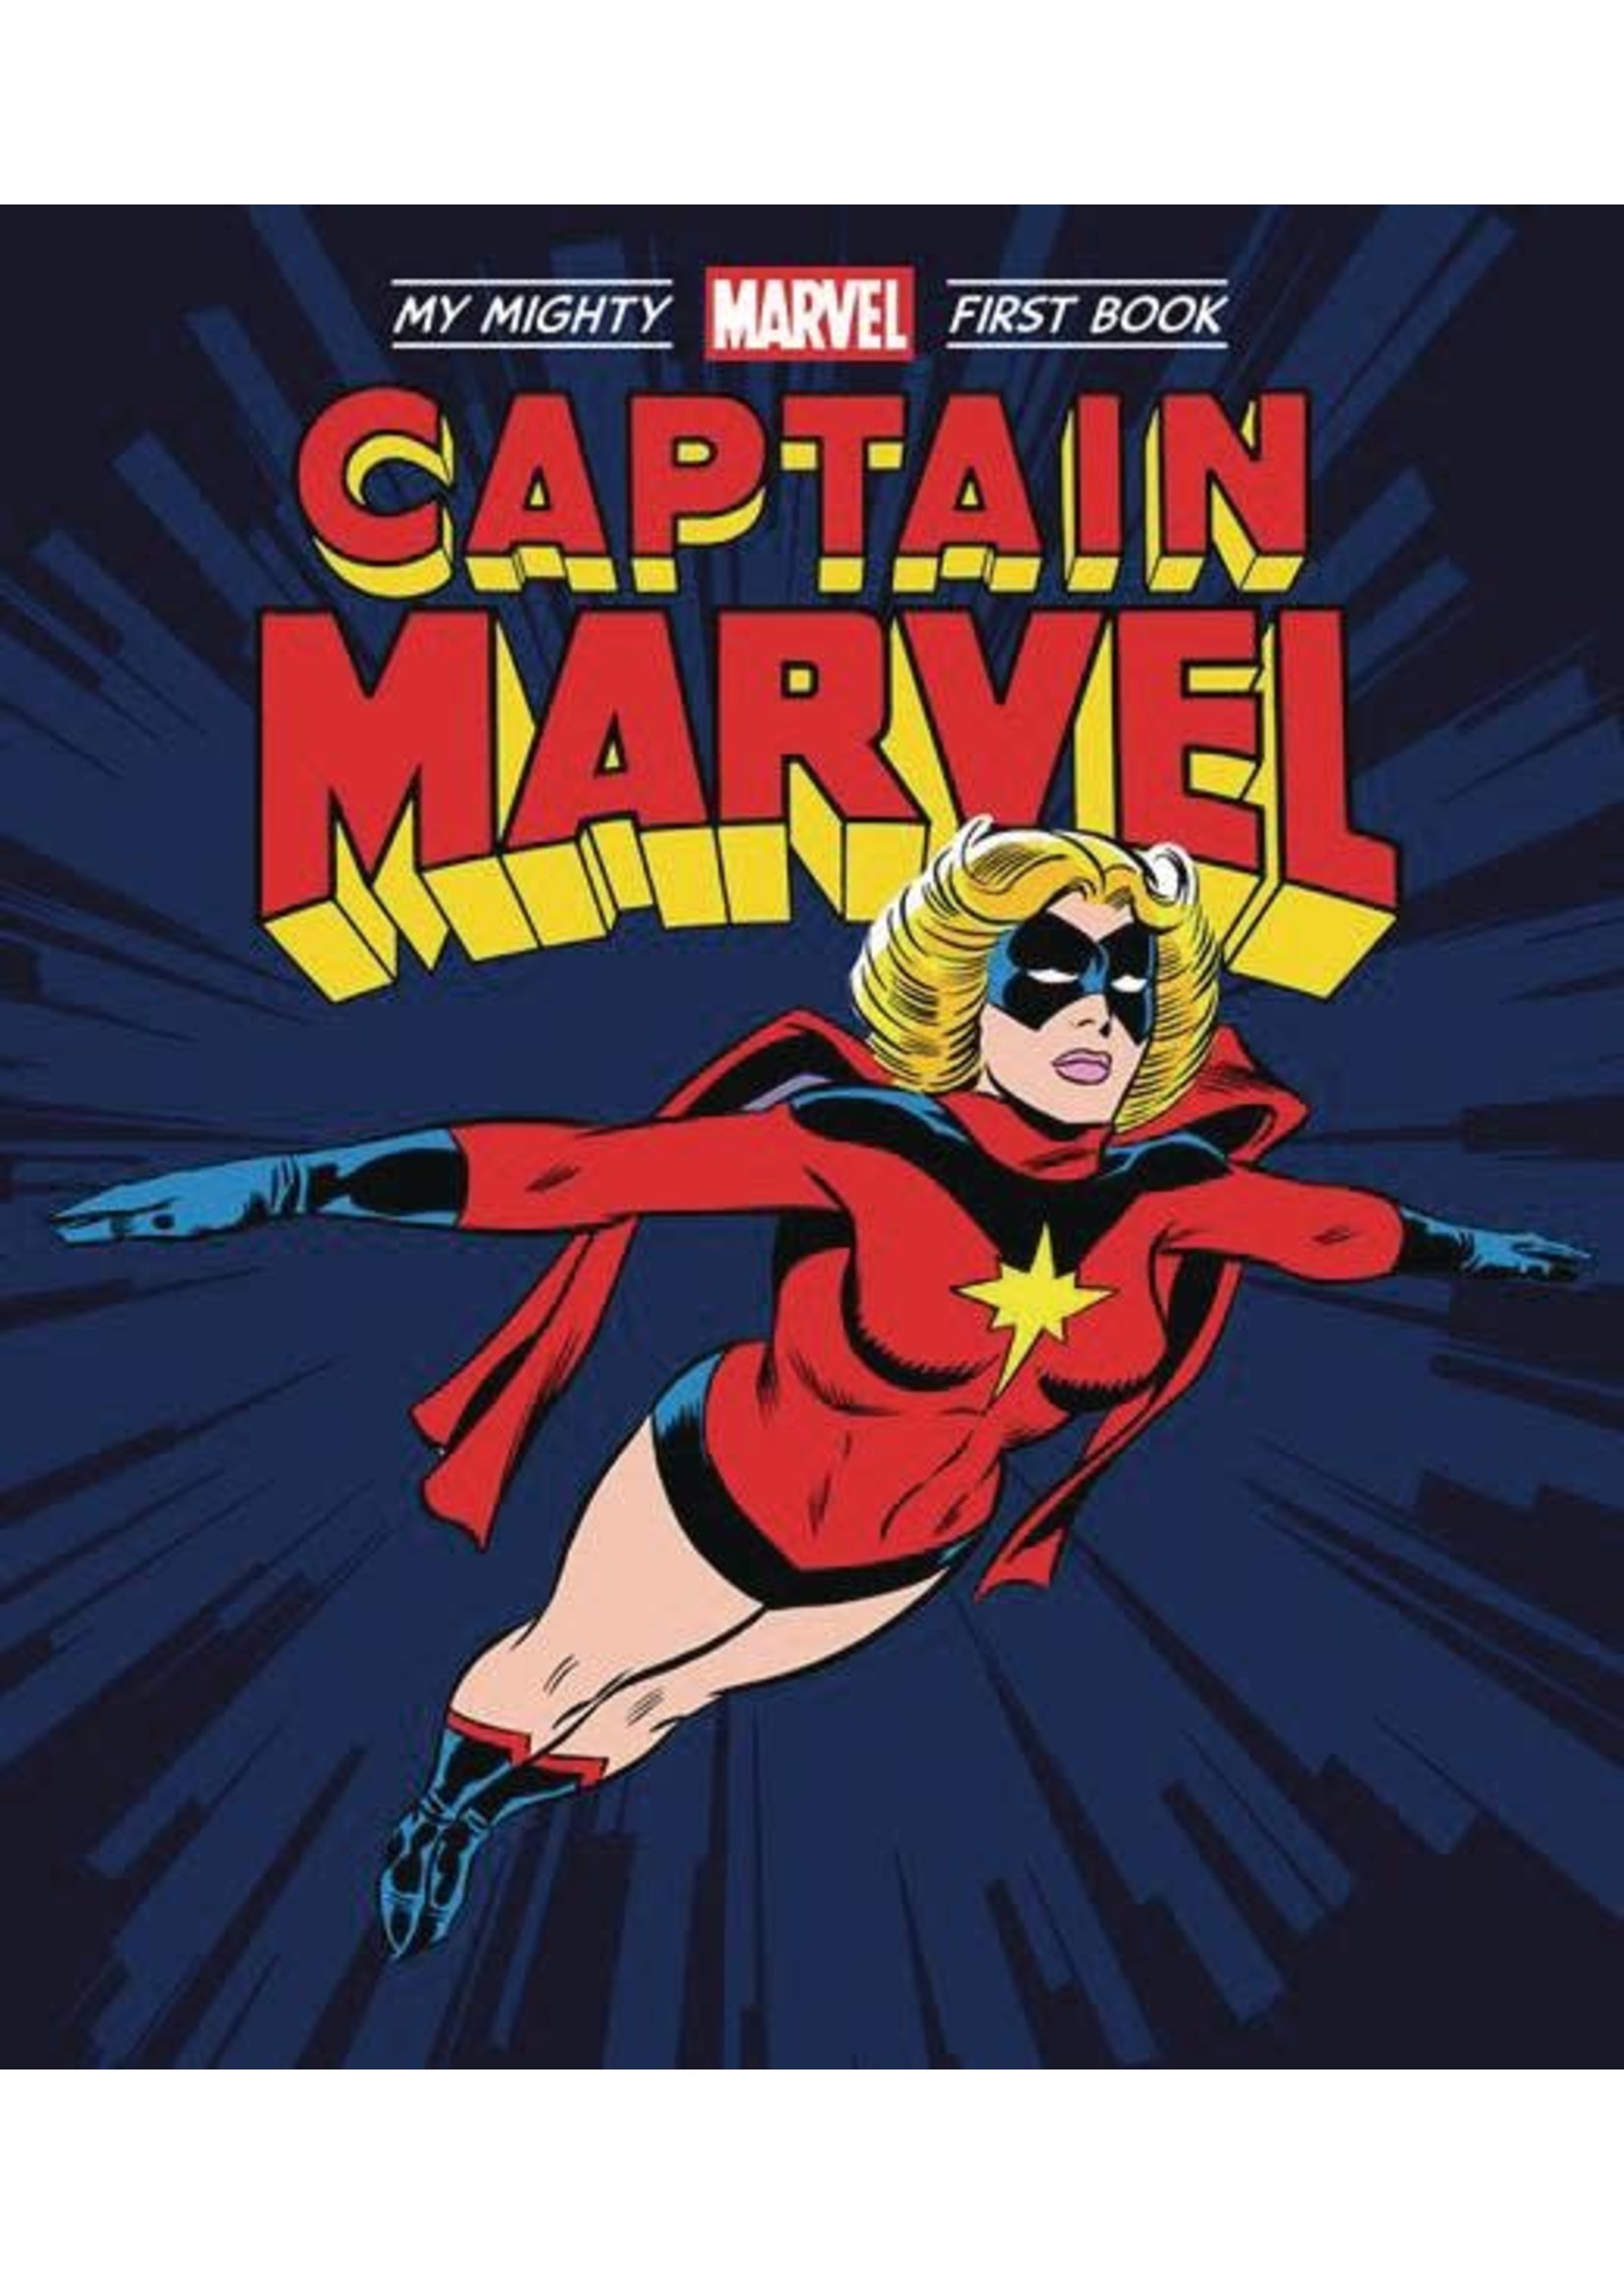 ABRAMS APPLESEED CAPTAIN MARVEL MY MIGHTY MARVEL FIRST BOOK BOARD BOOK